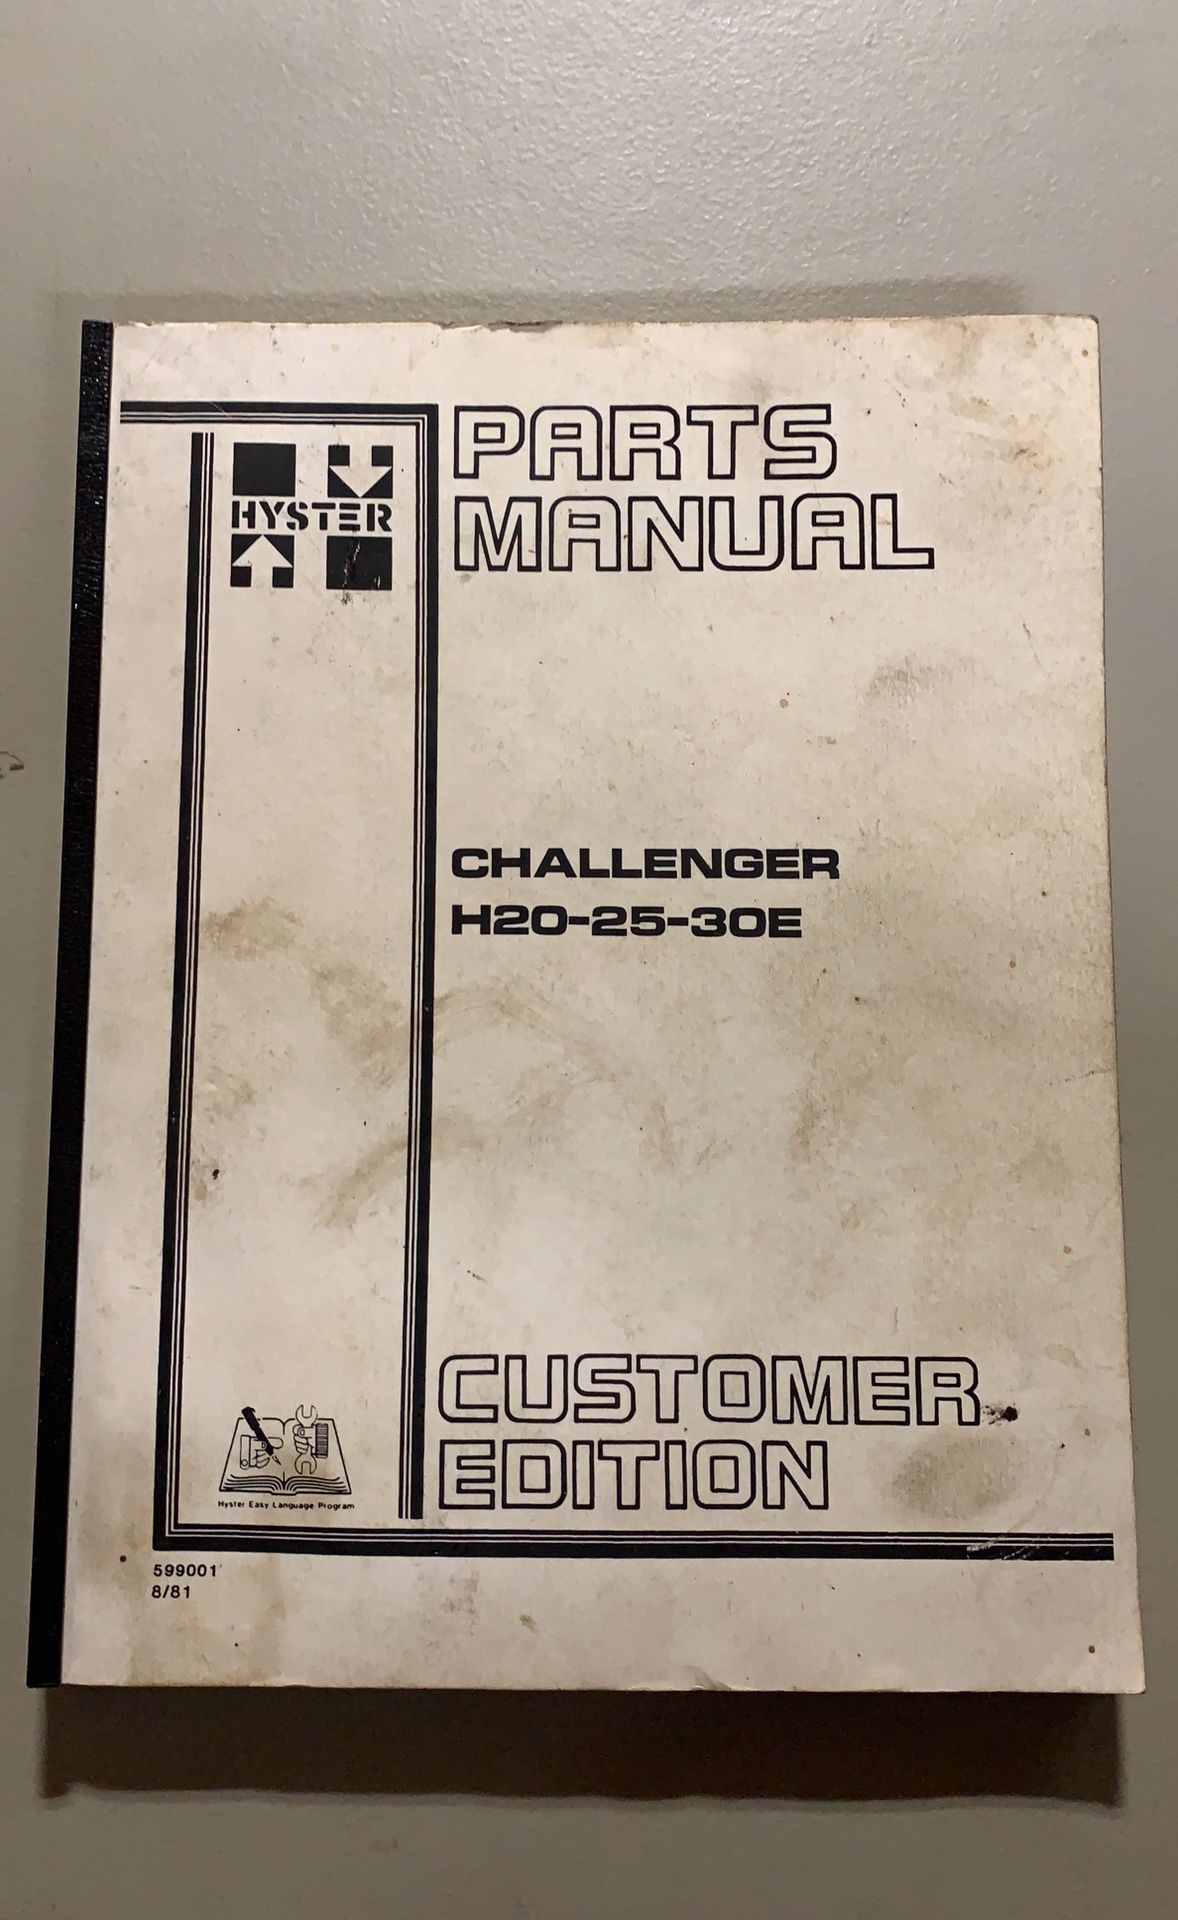 Hyster Challenger Parts And Service Manual